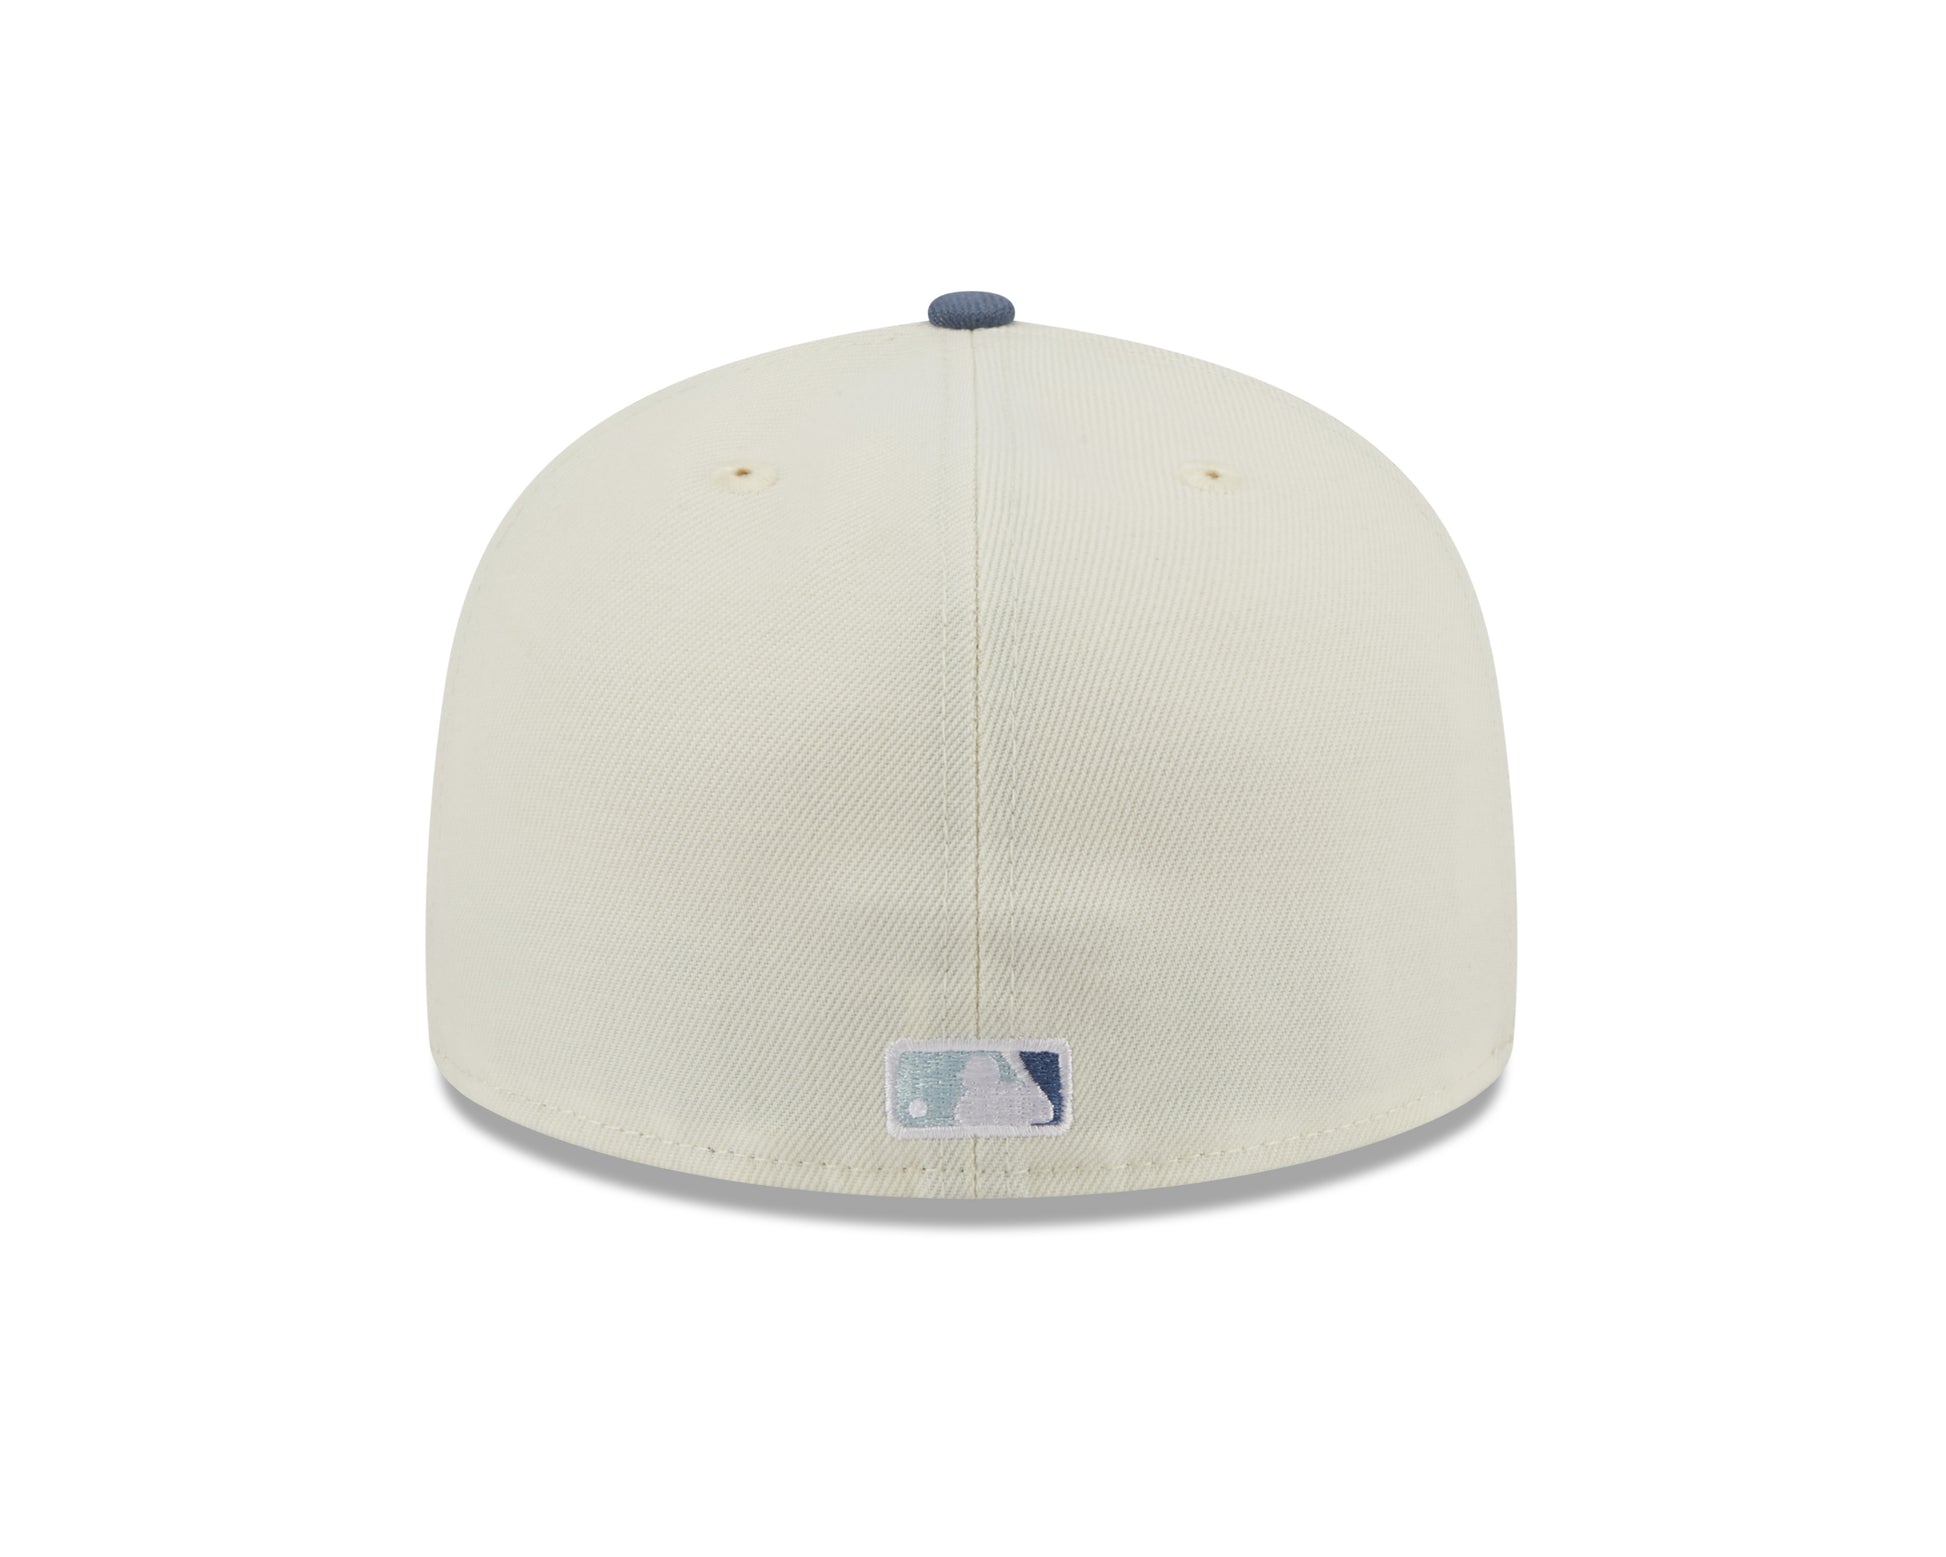 New Era 59fifty Fitted Cap Chicago White Sox THE ELEMENTS - Chrome White/Blue - Headz Up 